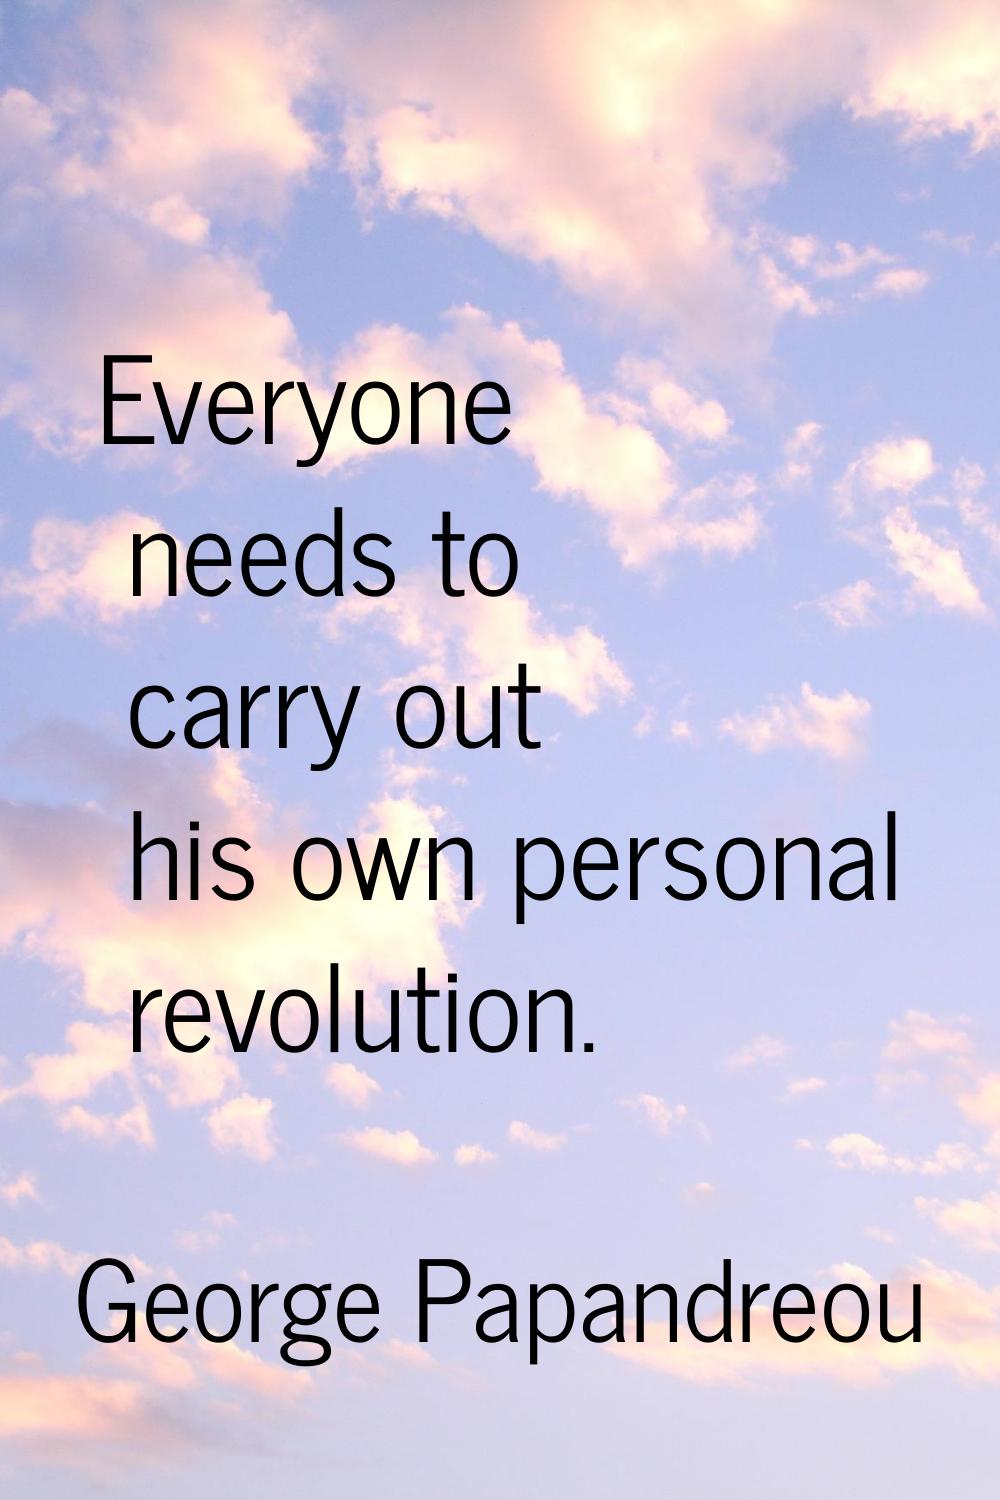 Everyone needs to carry out his own personal revolution.